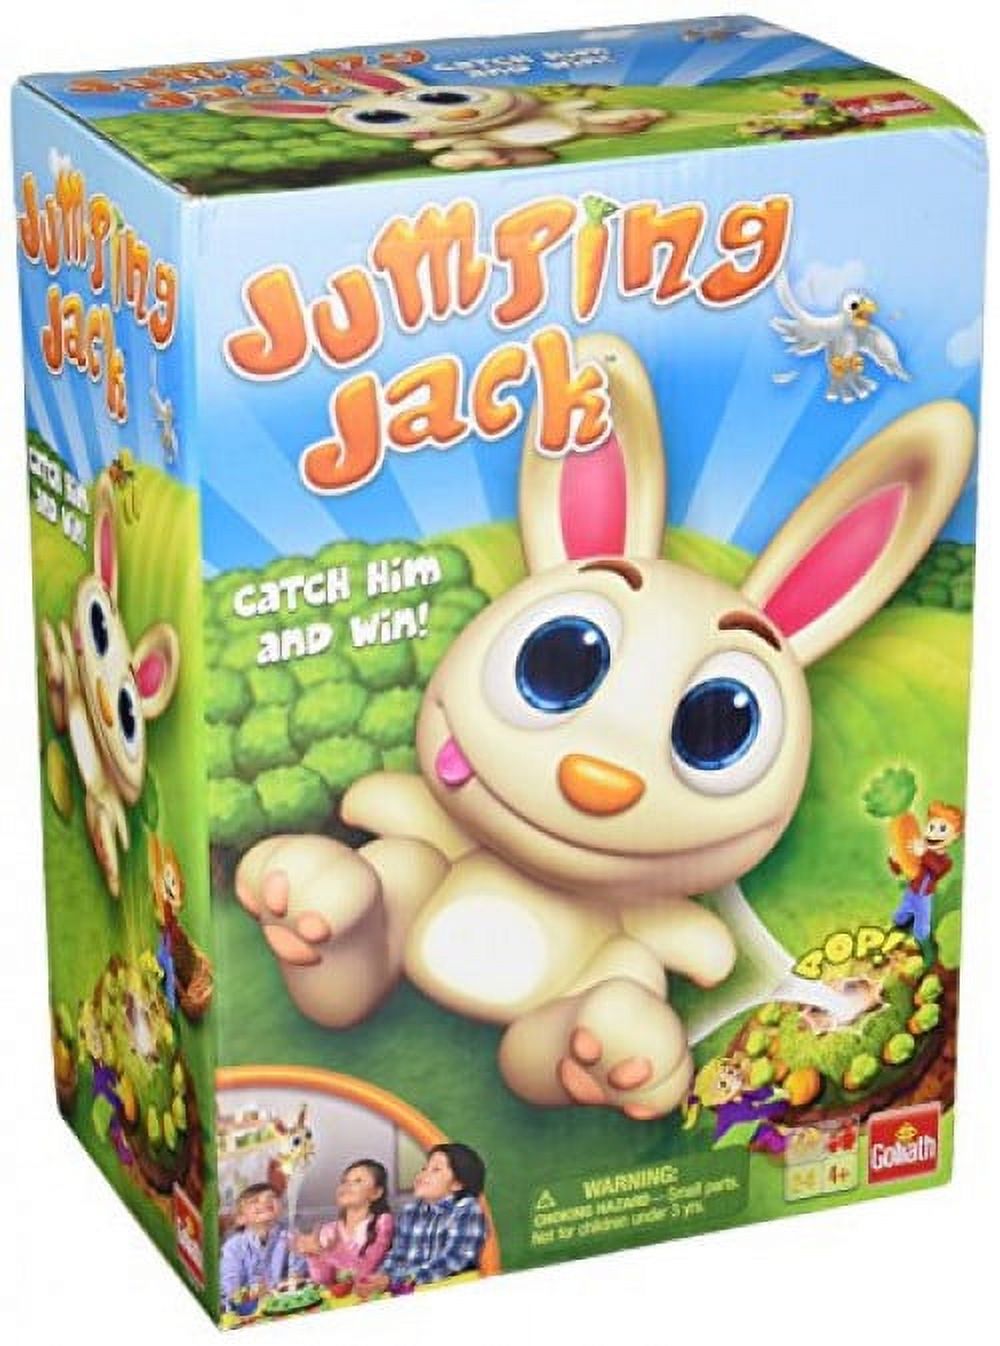 Jumping Jack - Pull Out a Carrot and Watch Jack Jump Game - image 1 of 3